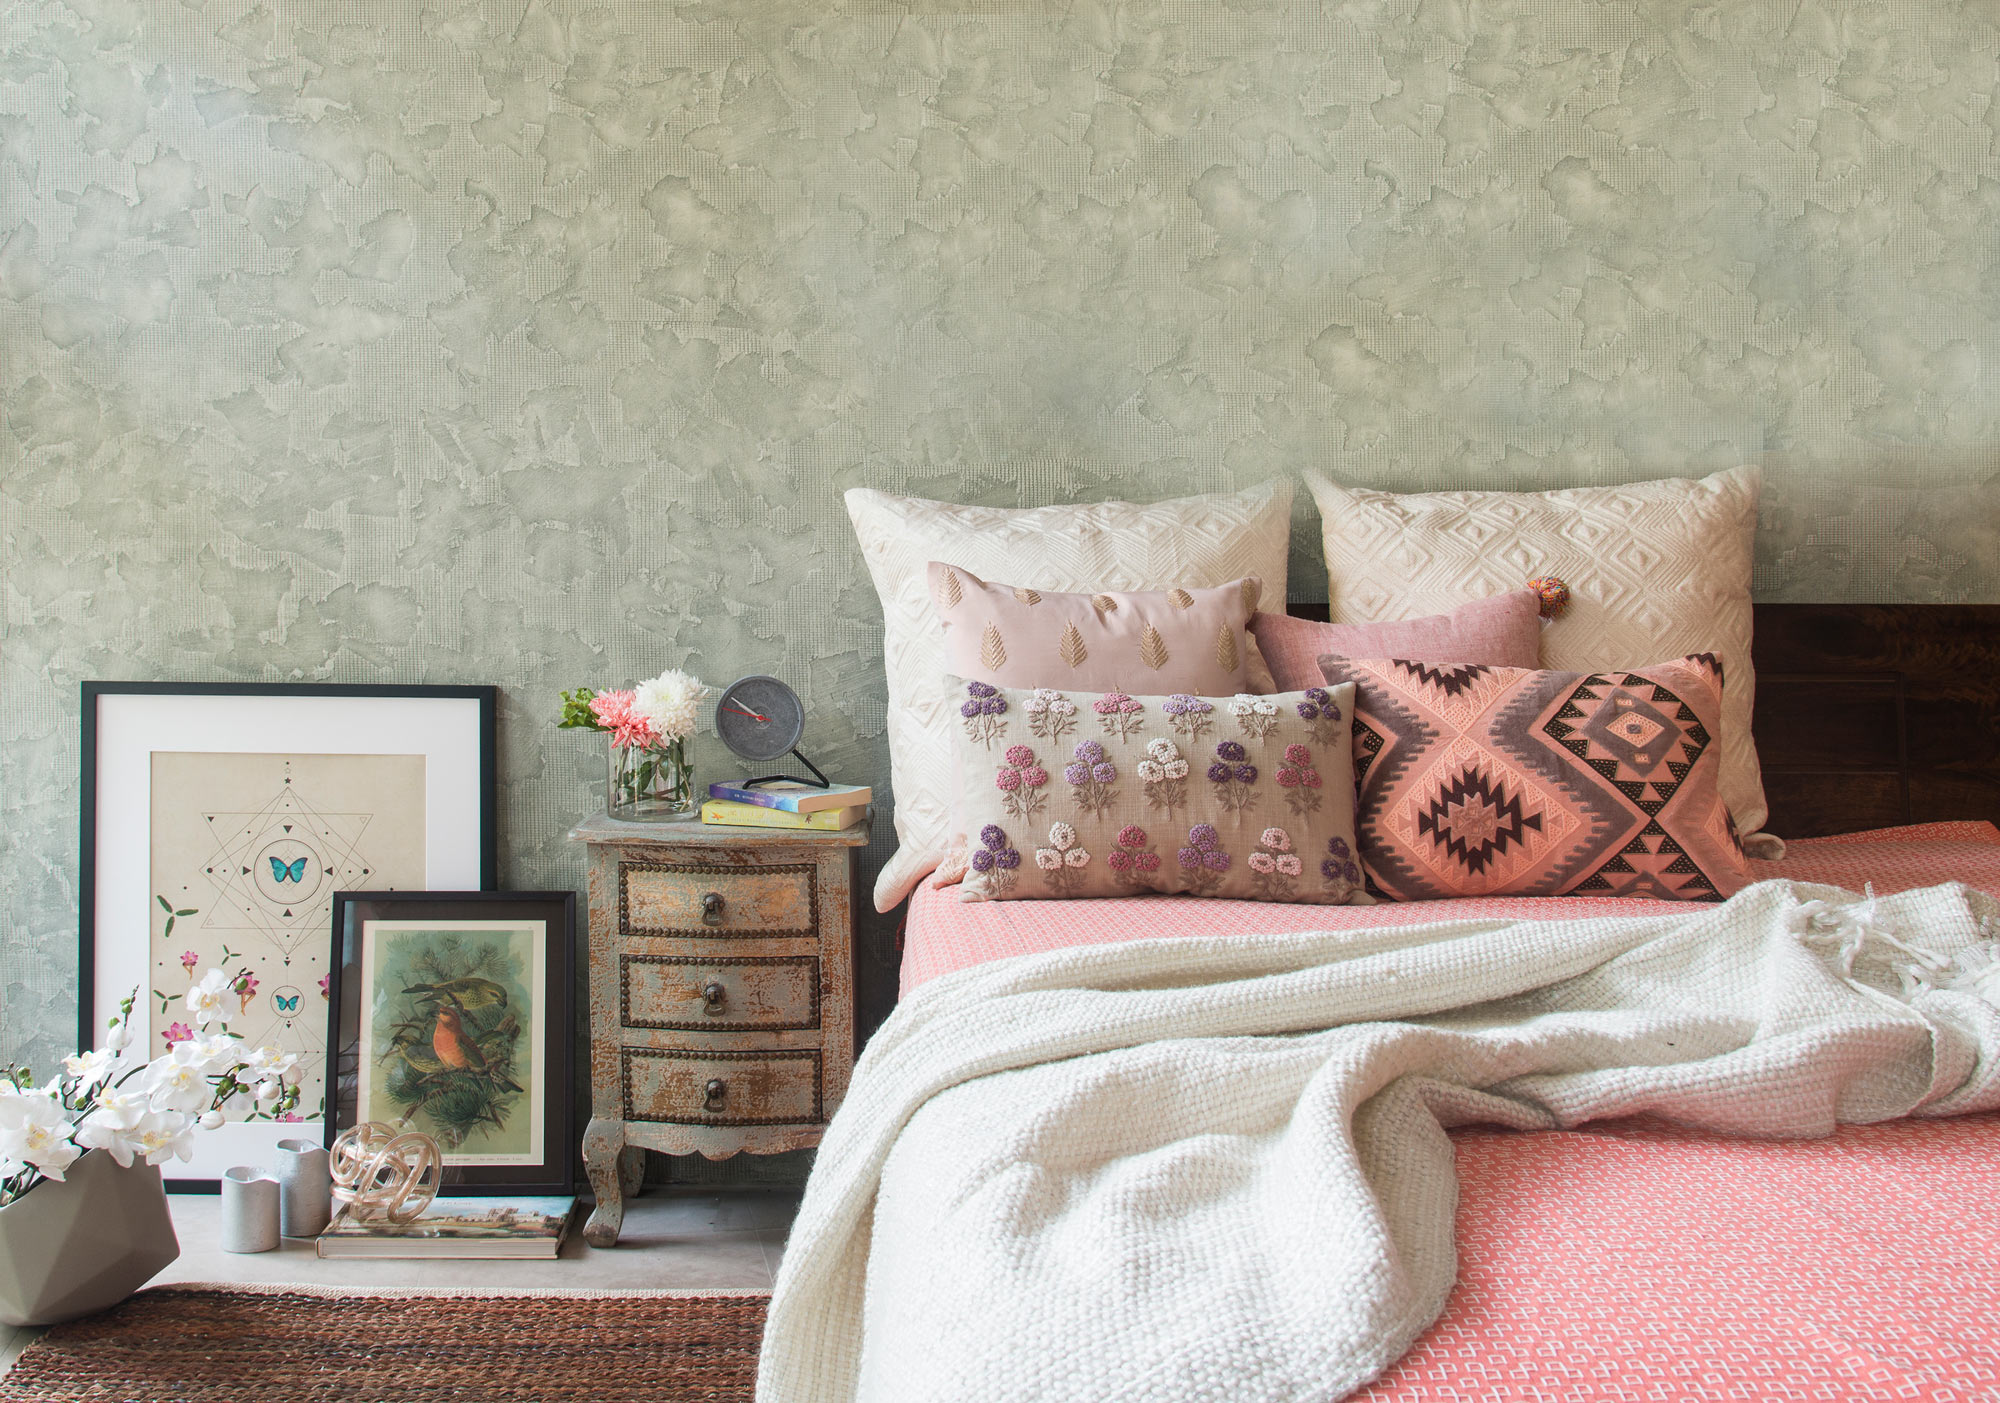 Romantic Corner Design Ideas With Blush Pinks, Soft Lavender & Vintage Accents - Beautiful Homes